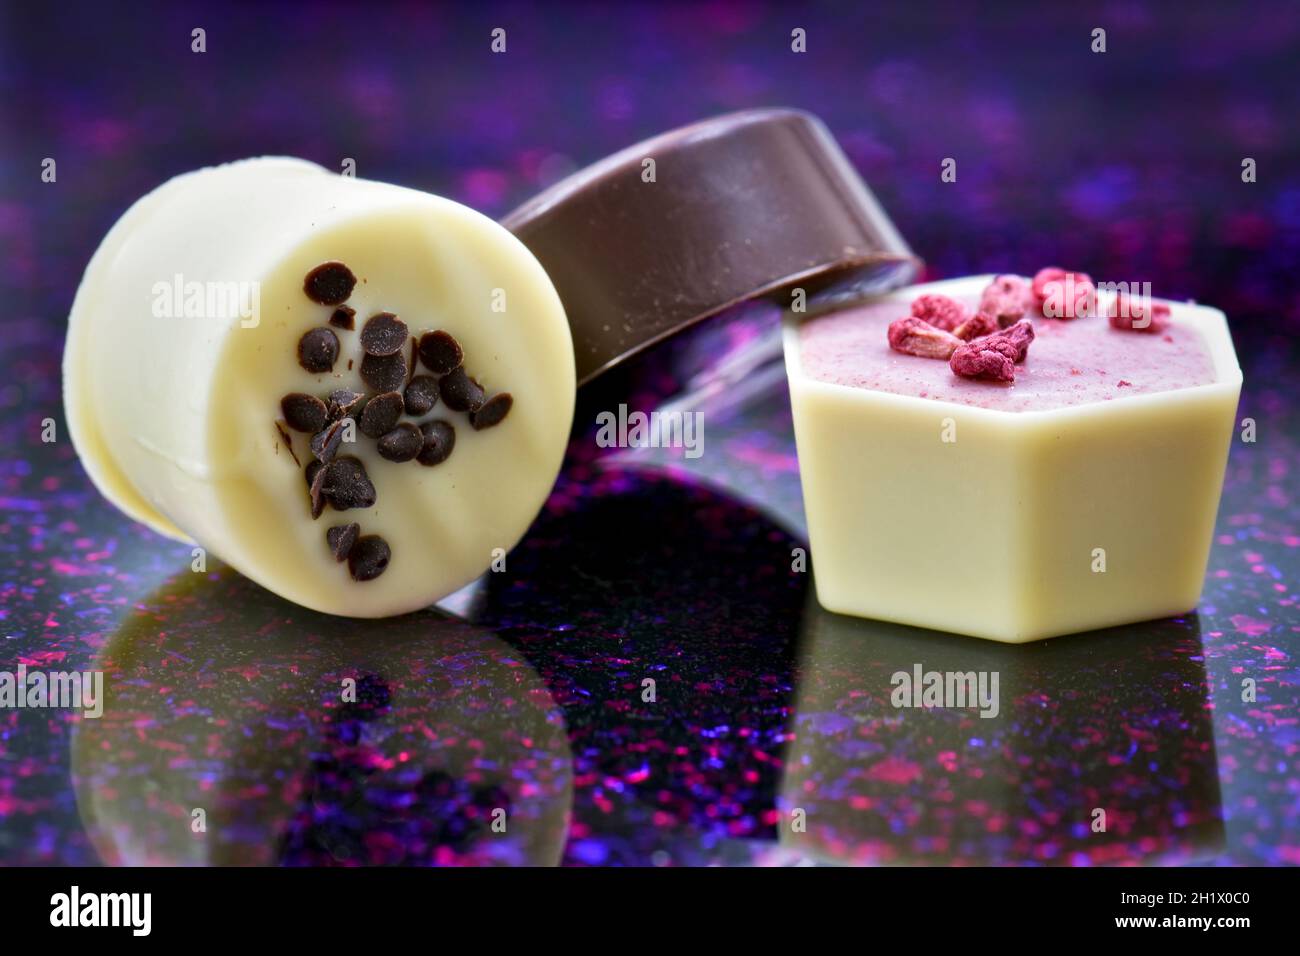 Close up of luxury continental or Belgian assorted chocolates on purple and pink speckled background Stock Photo